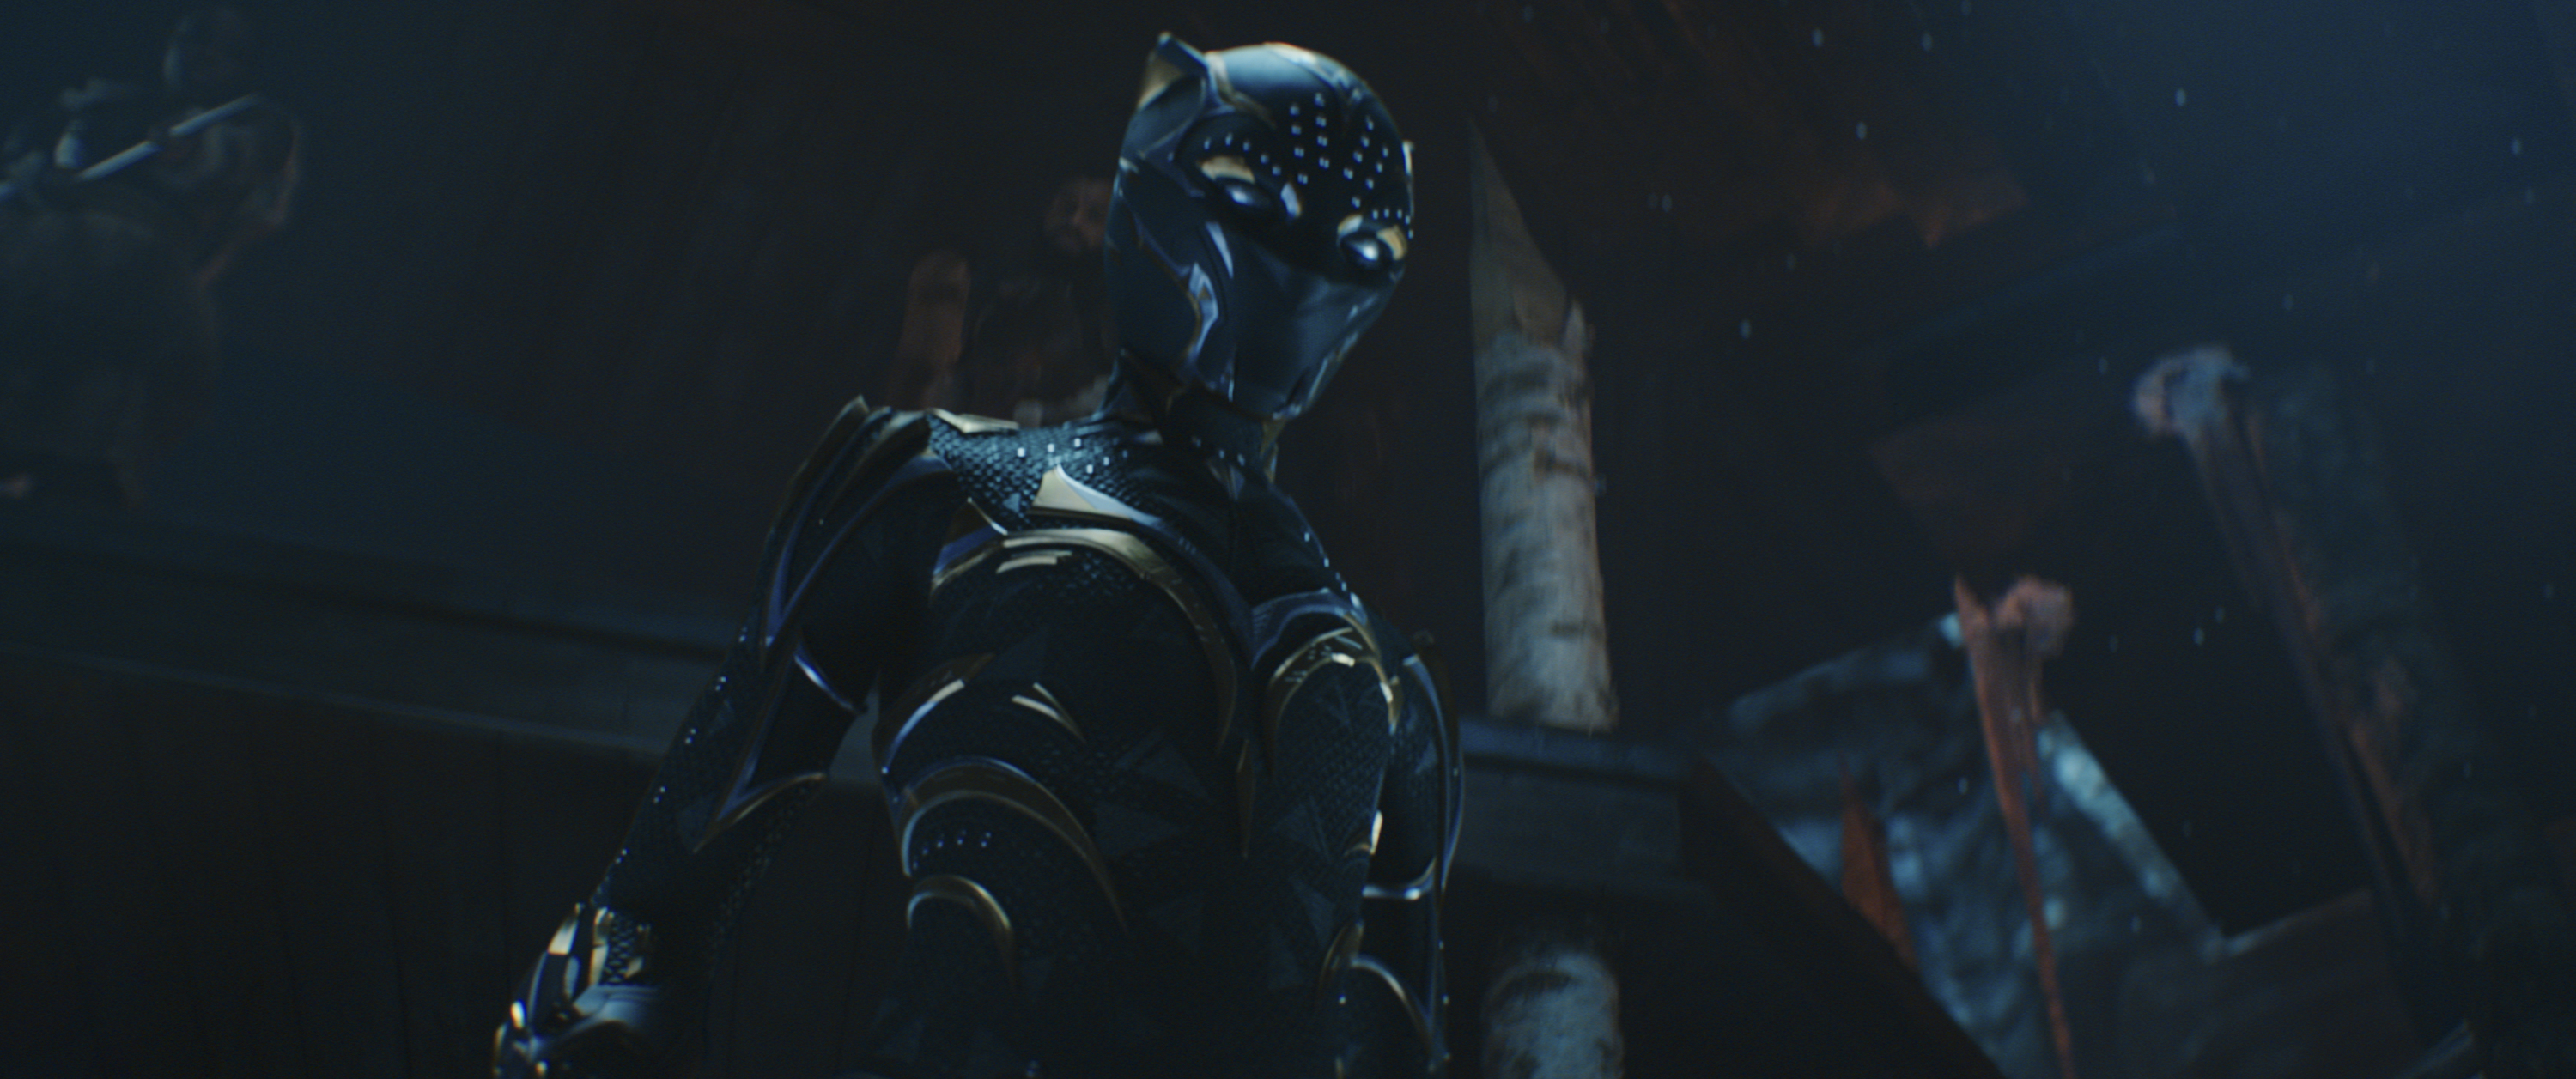 New 'Black Panther 2' trailer shows Namor and Ironheart in action